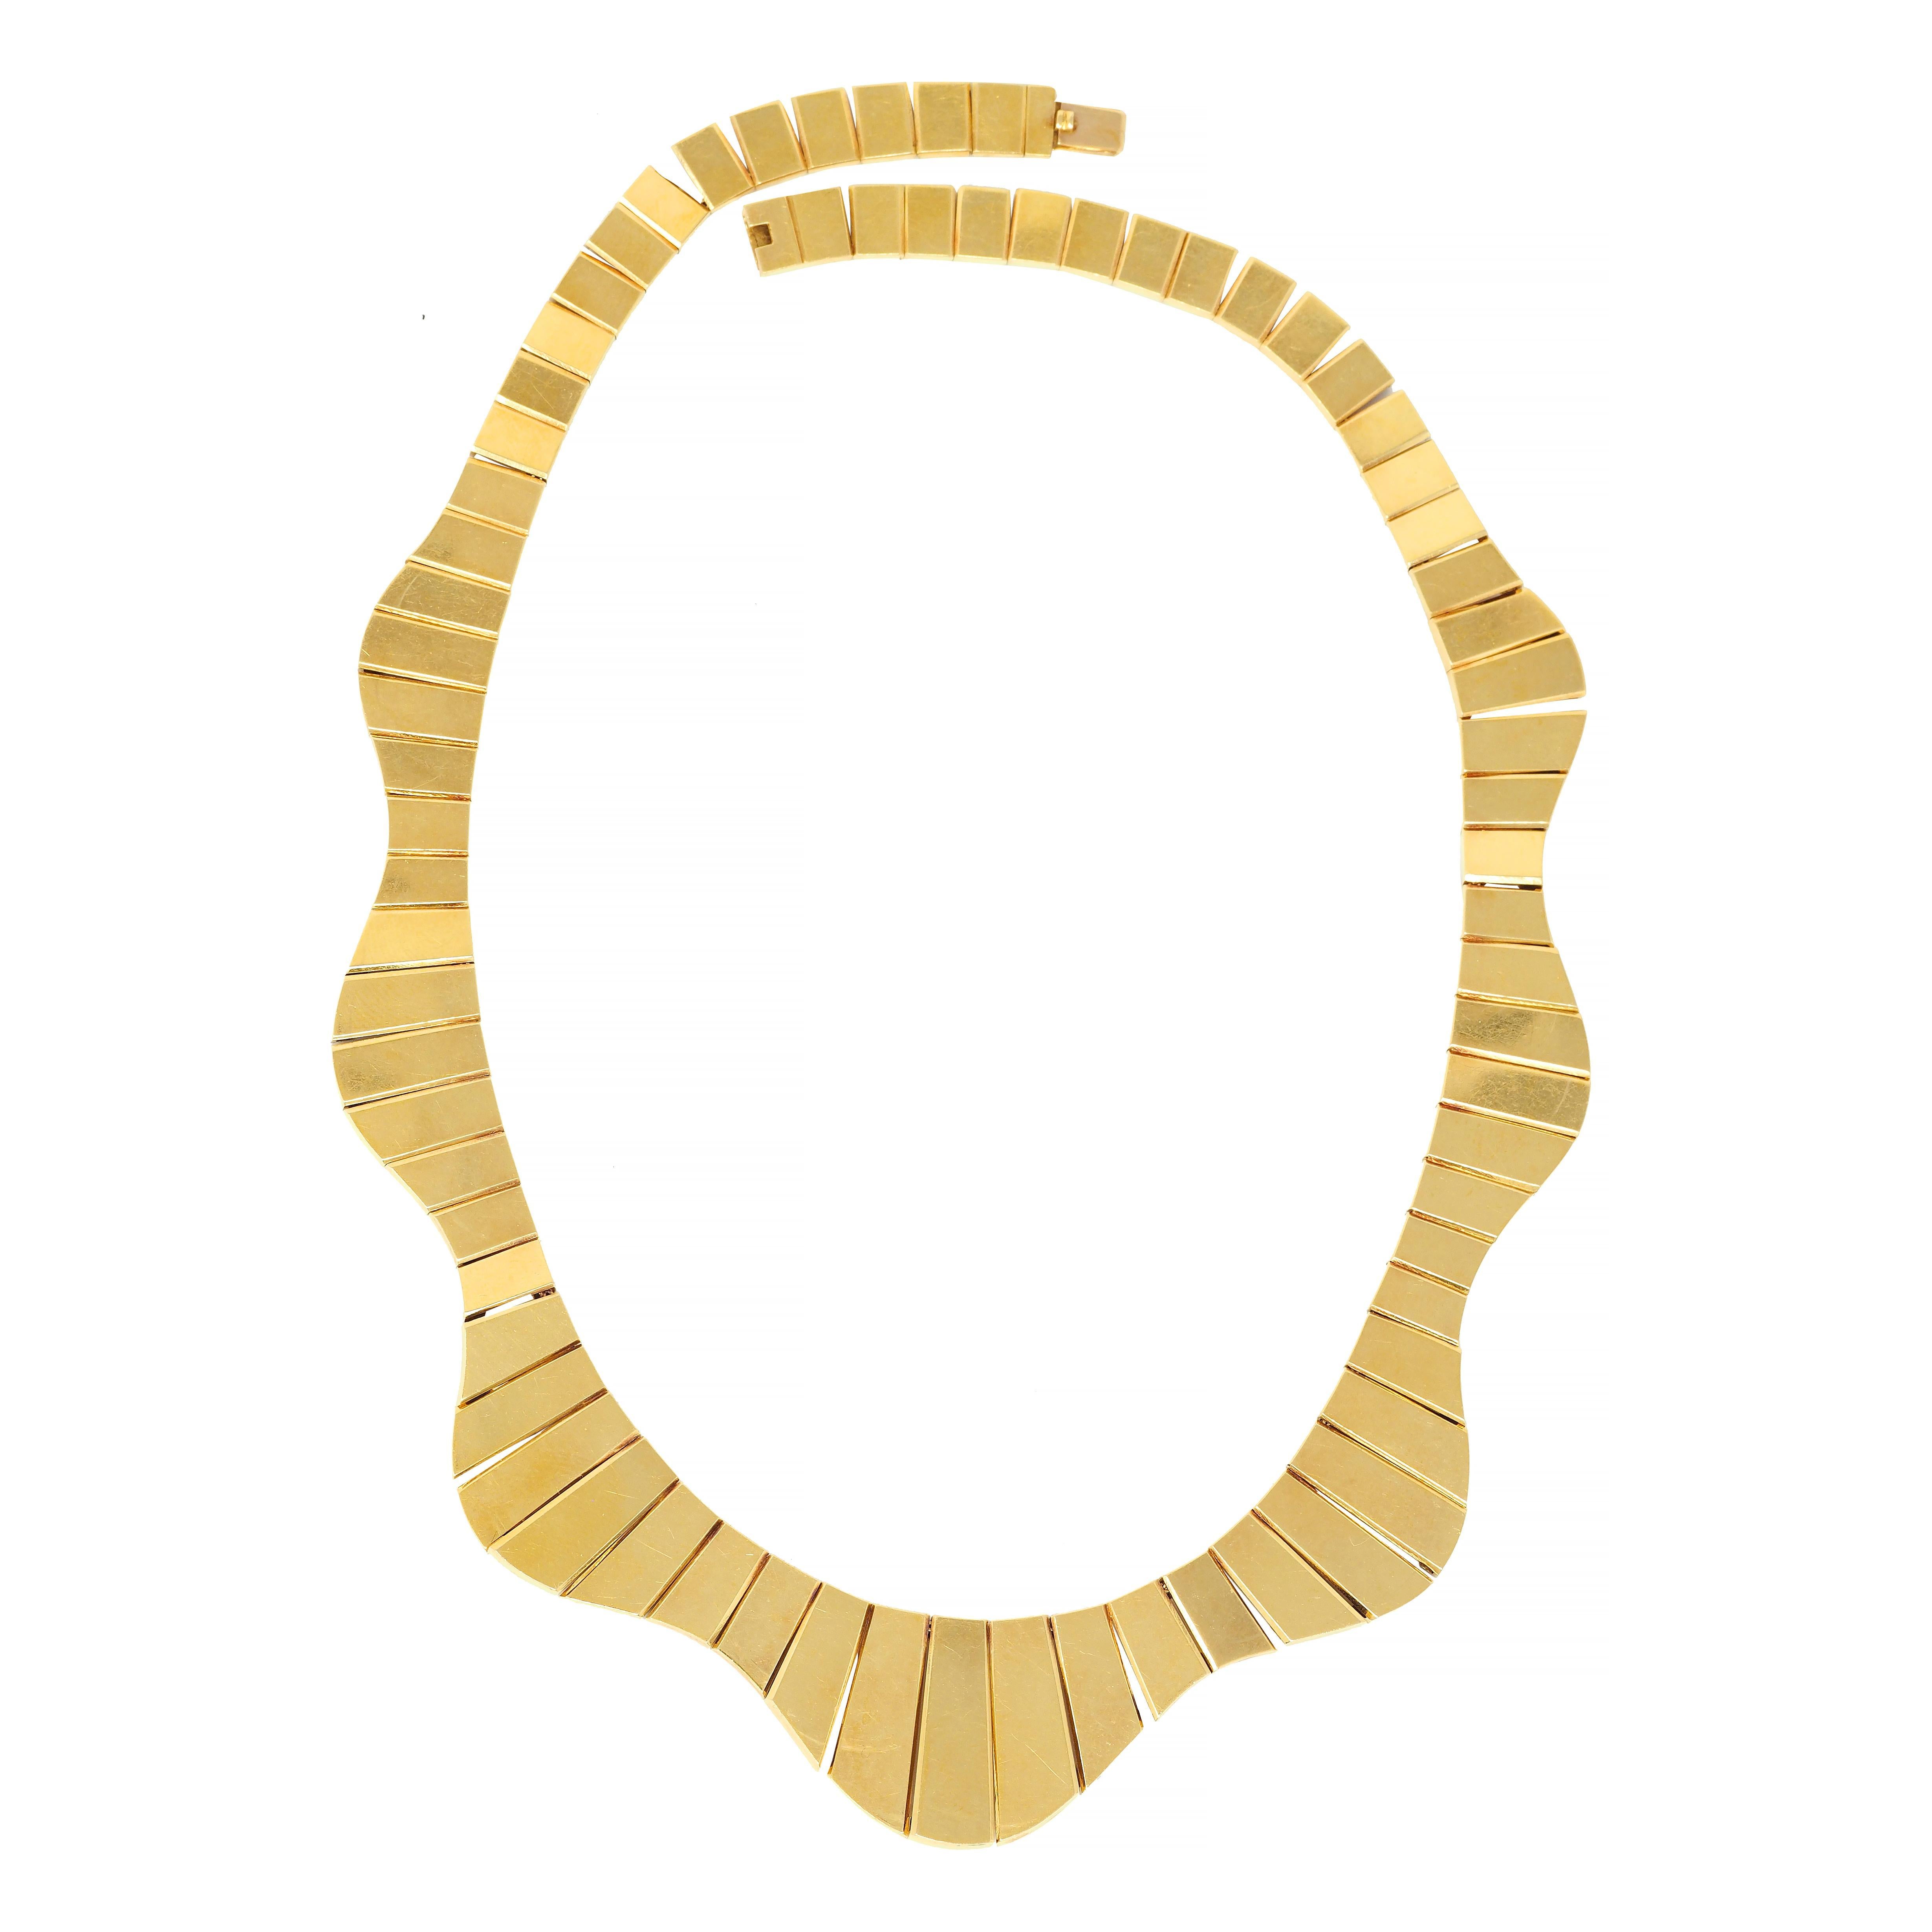 Comprised of fitted tab-like segments strung along rope chain
Displaying an undulating wave motif 
With high polish finish 
Stamped for 18 karat gold 
Numbered and fully signed for Cartier, Ca.
Circa: 1960s
Width at widest: 7/8 inch
Length: 16